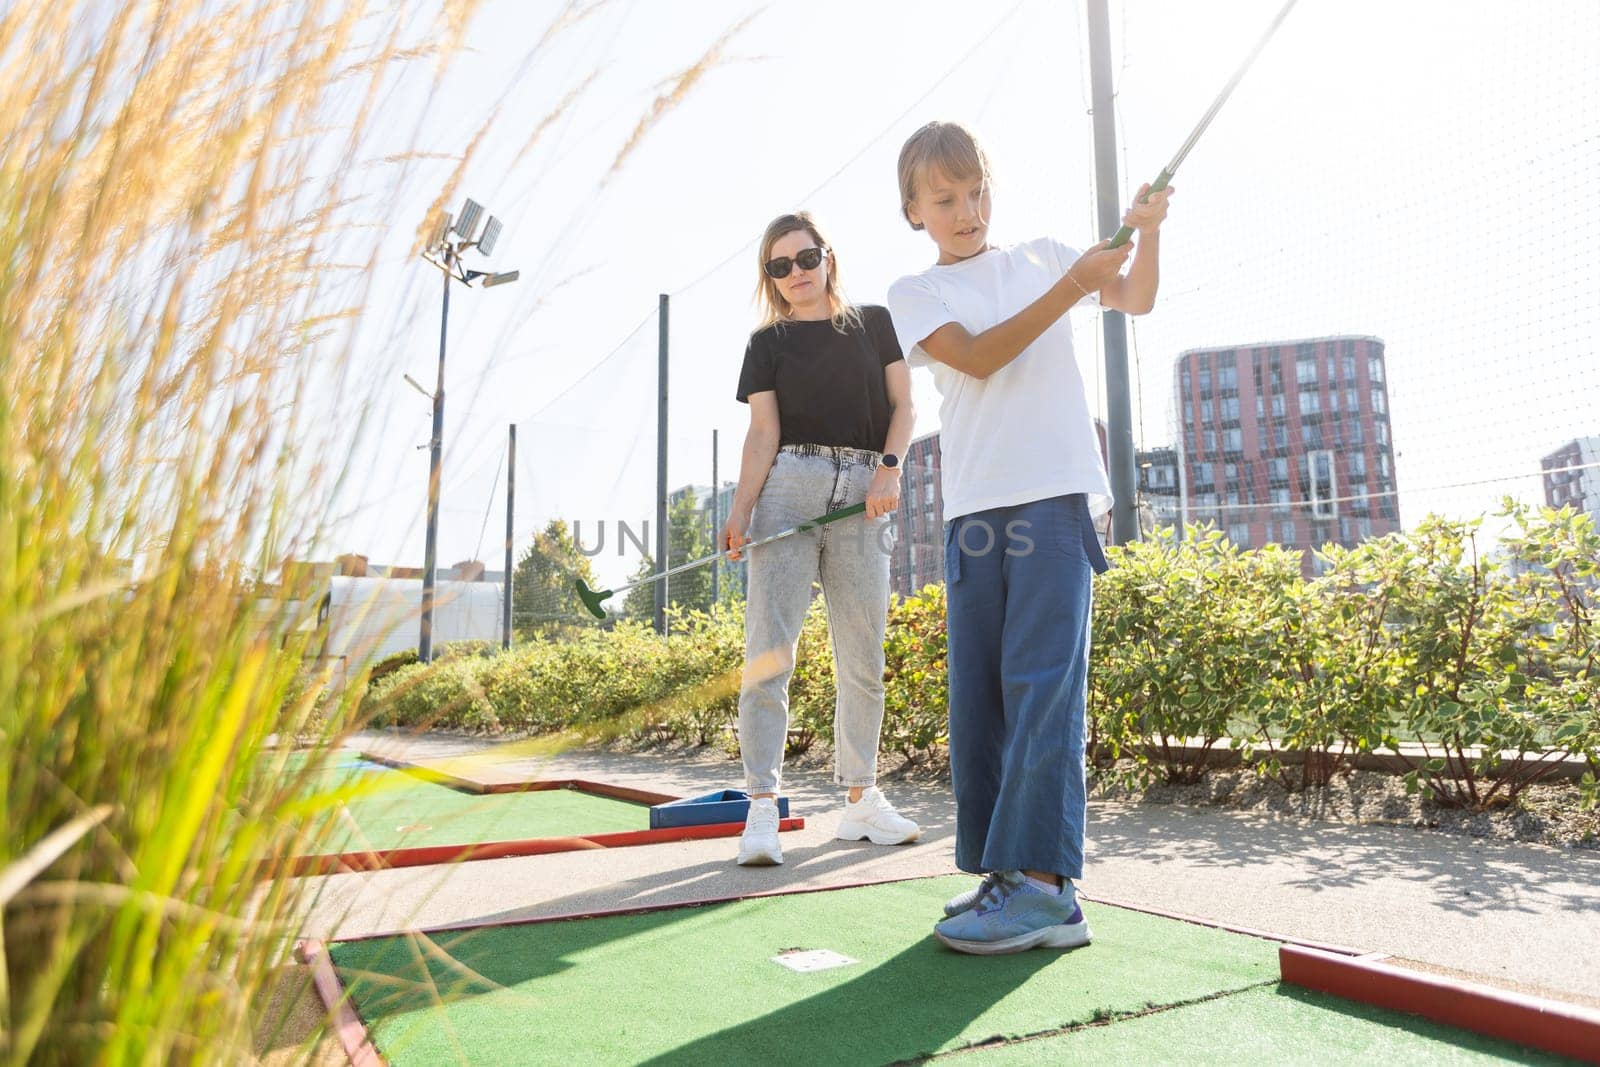 Cute school girl playing mini golf with family. Happy toddler child having fun with outdoor activity. Summer sport for children and adults, outdoors. Family vacations or resort. High quality photo